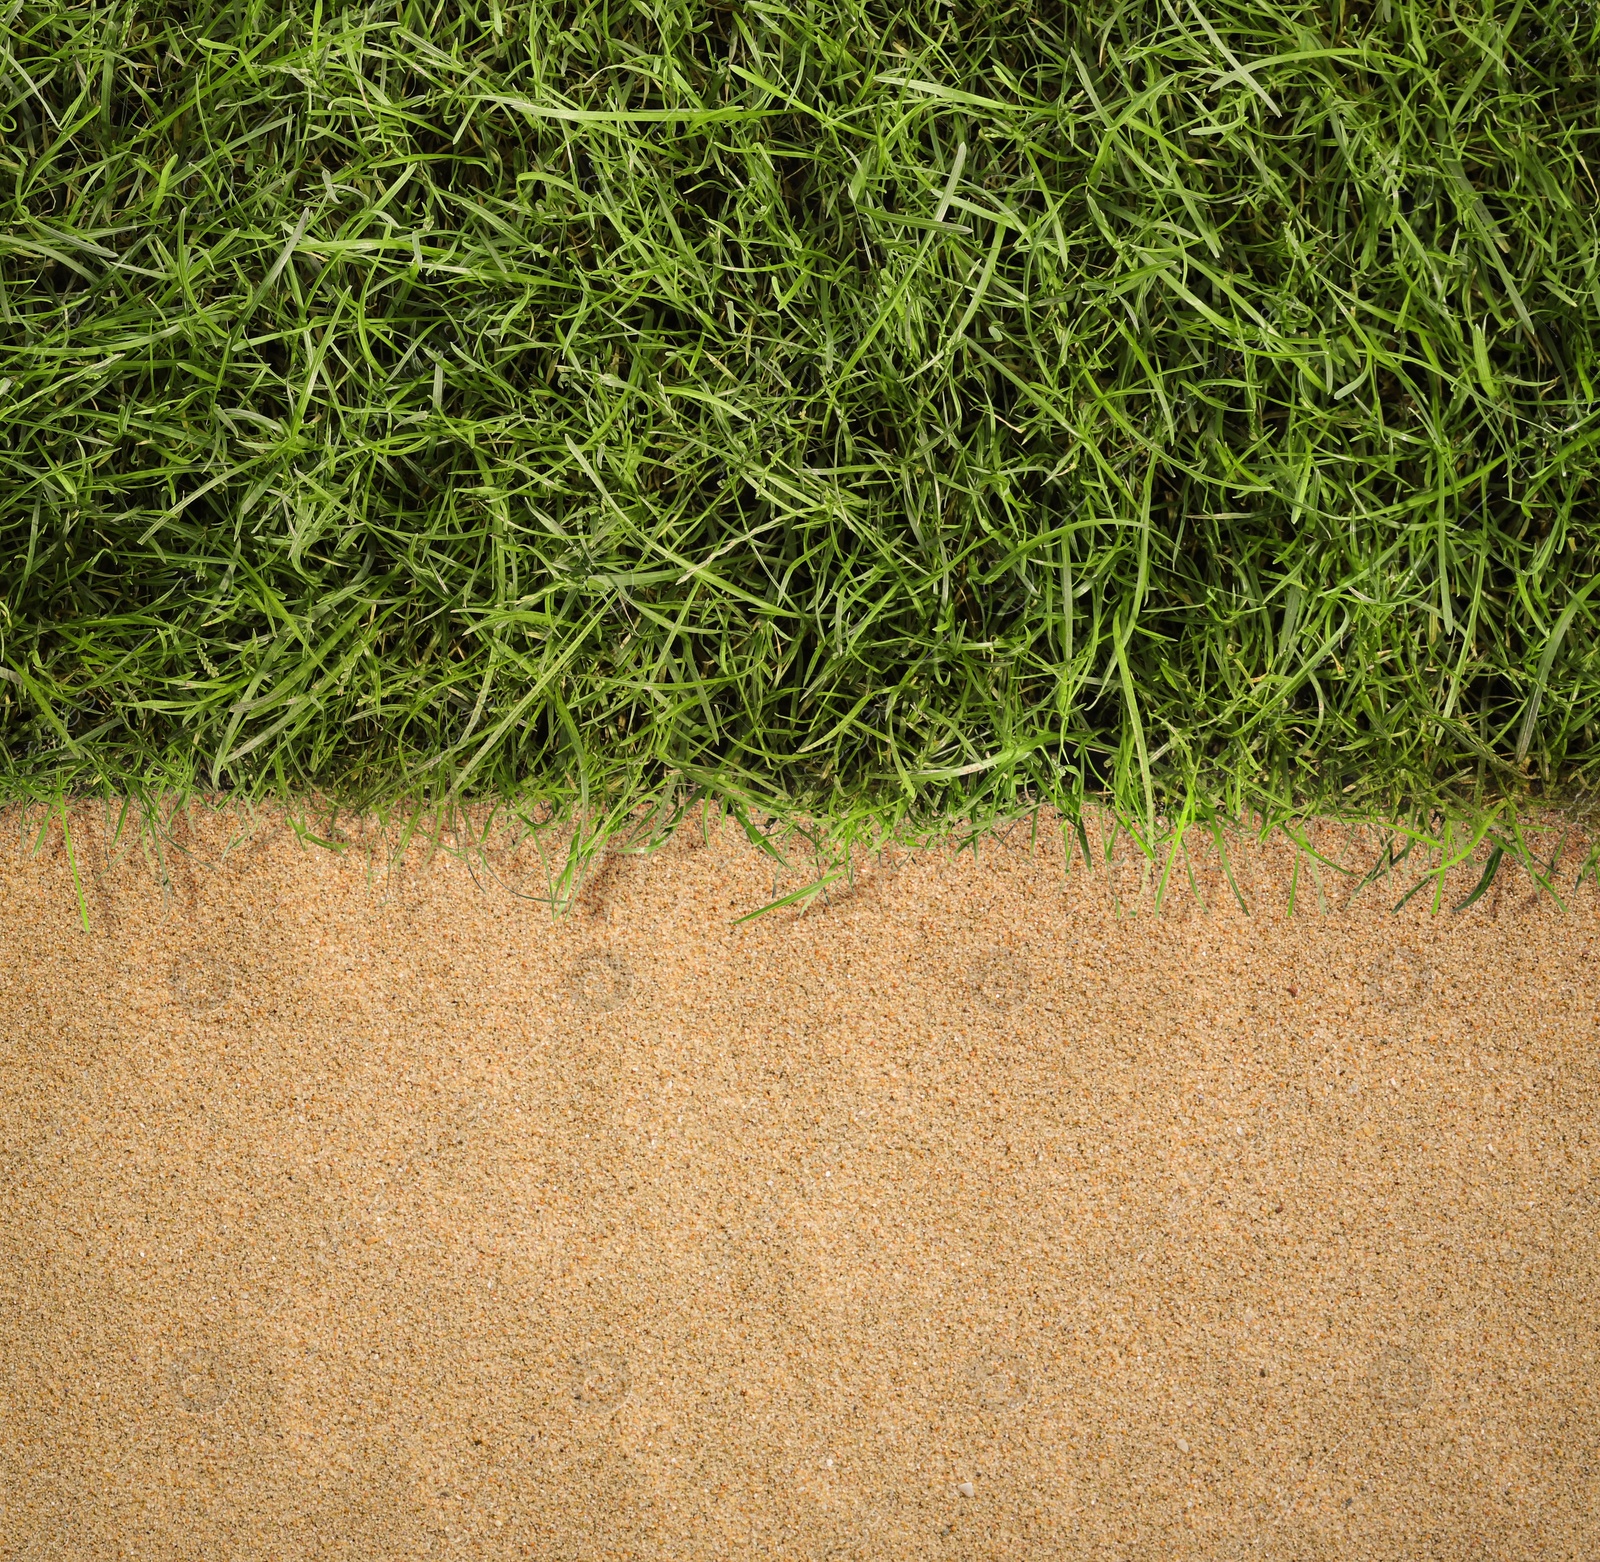 Image of Fresh green grass and sand outdoors, top view